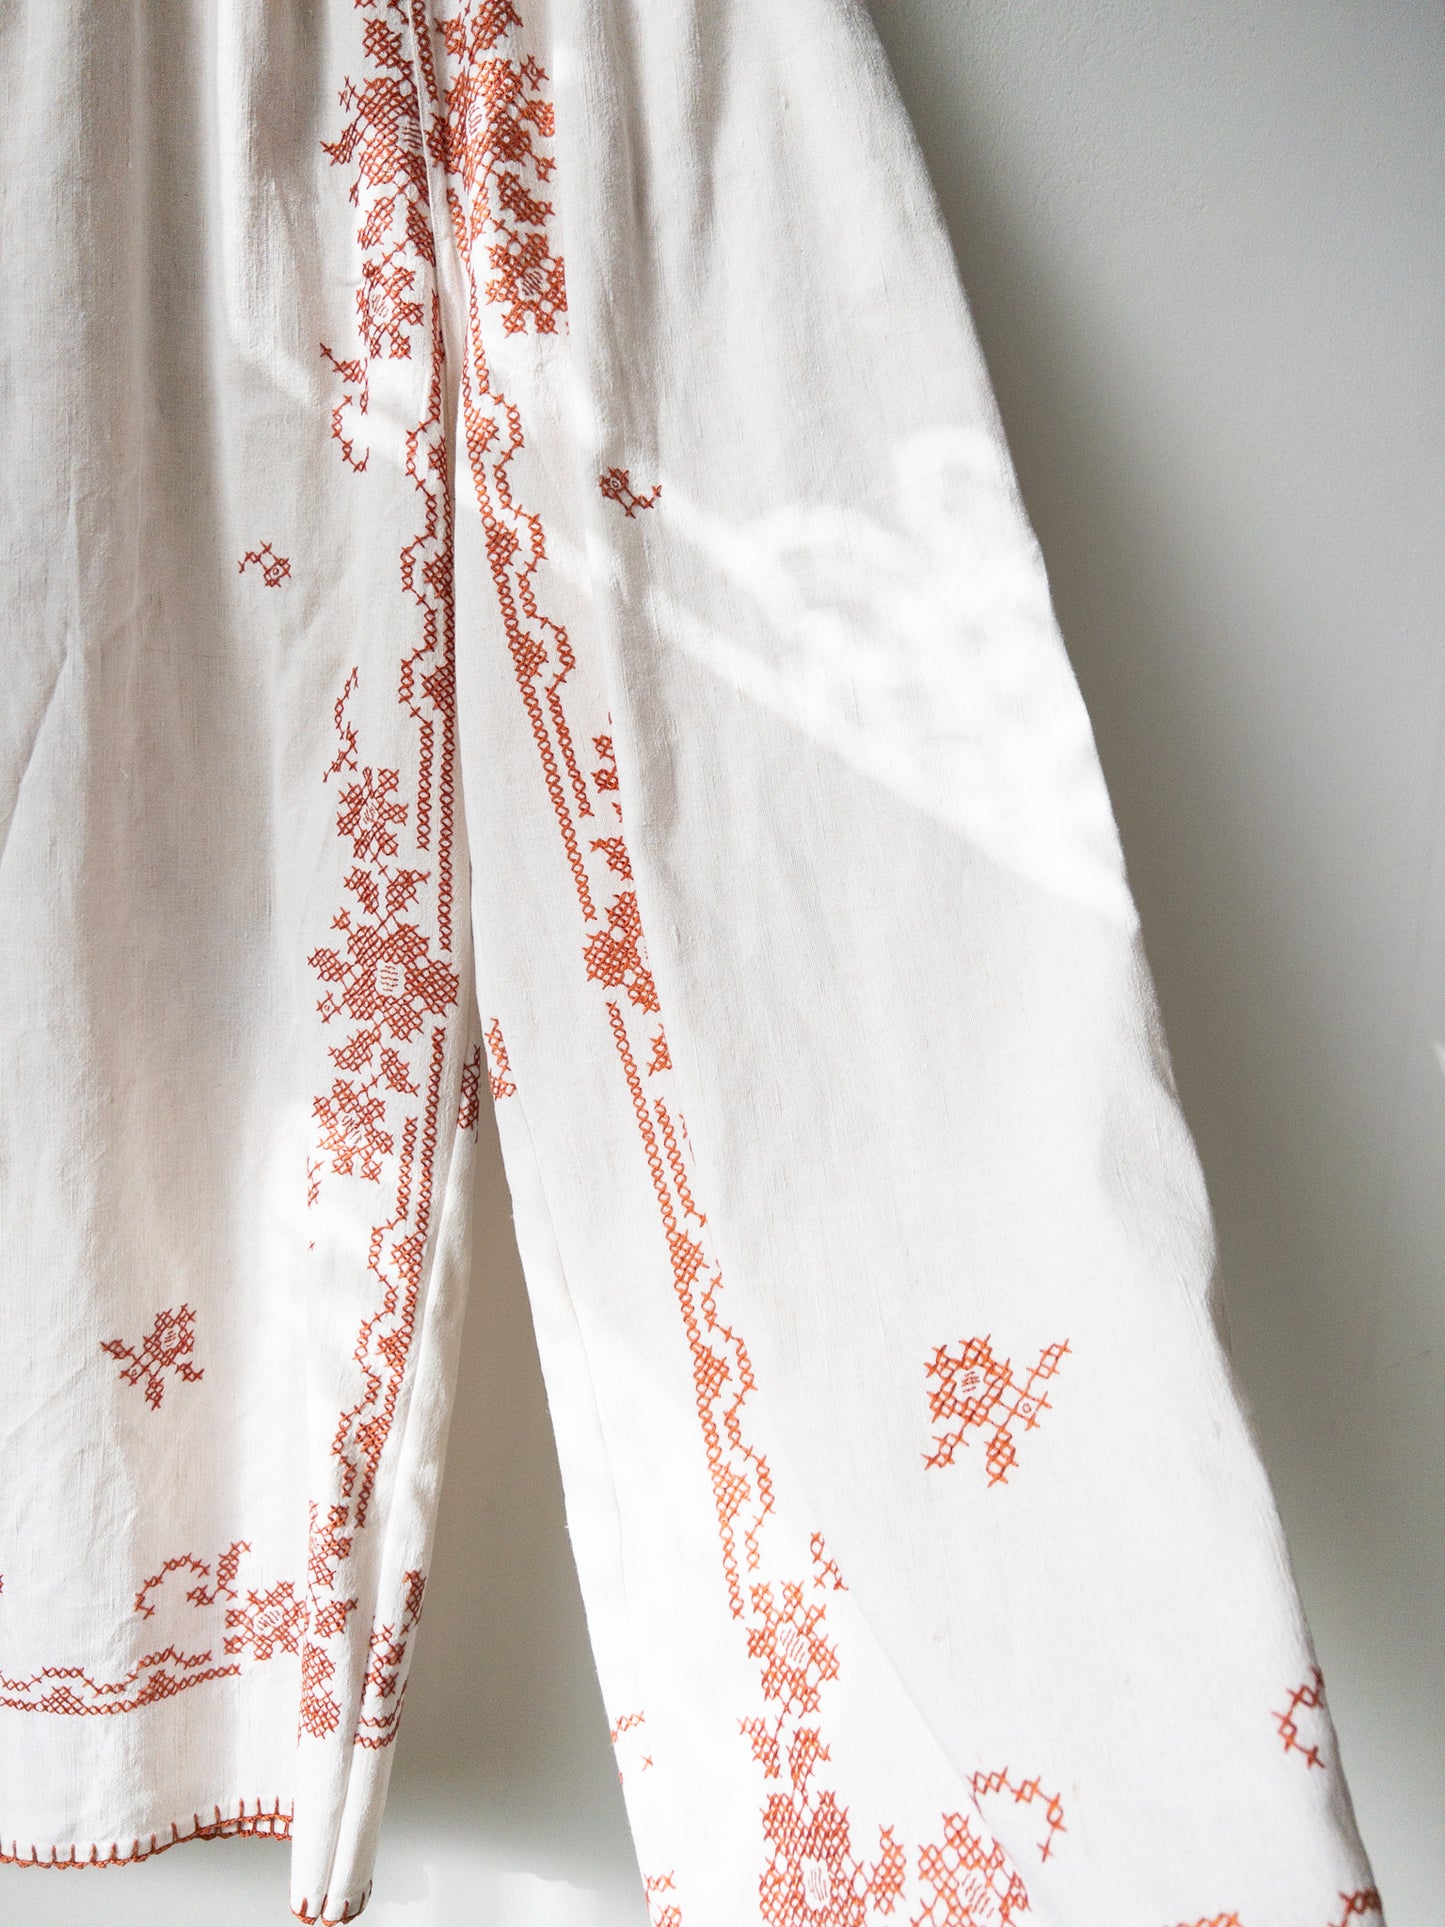 Linen pants with embroidery